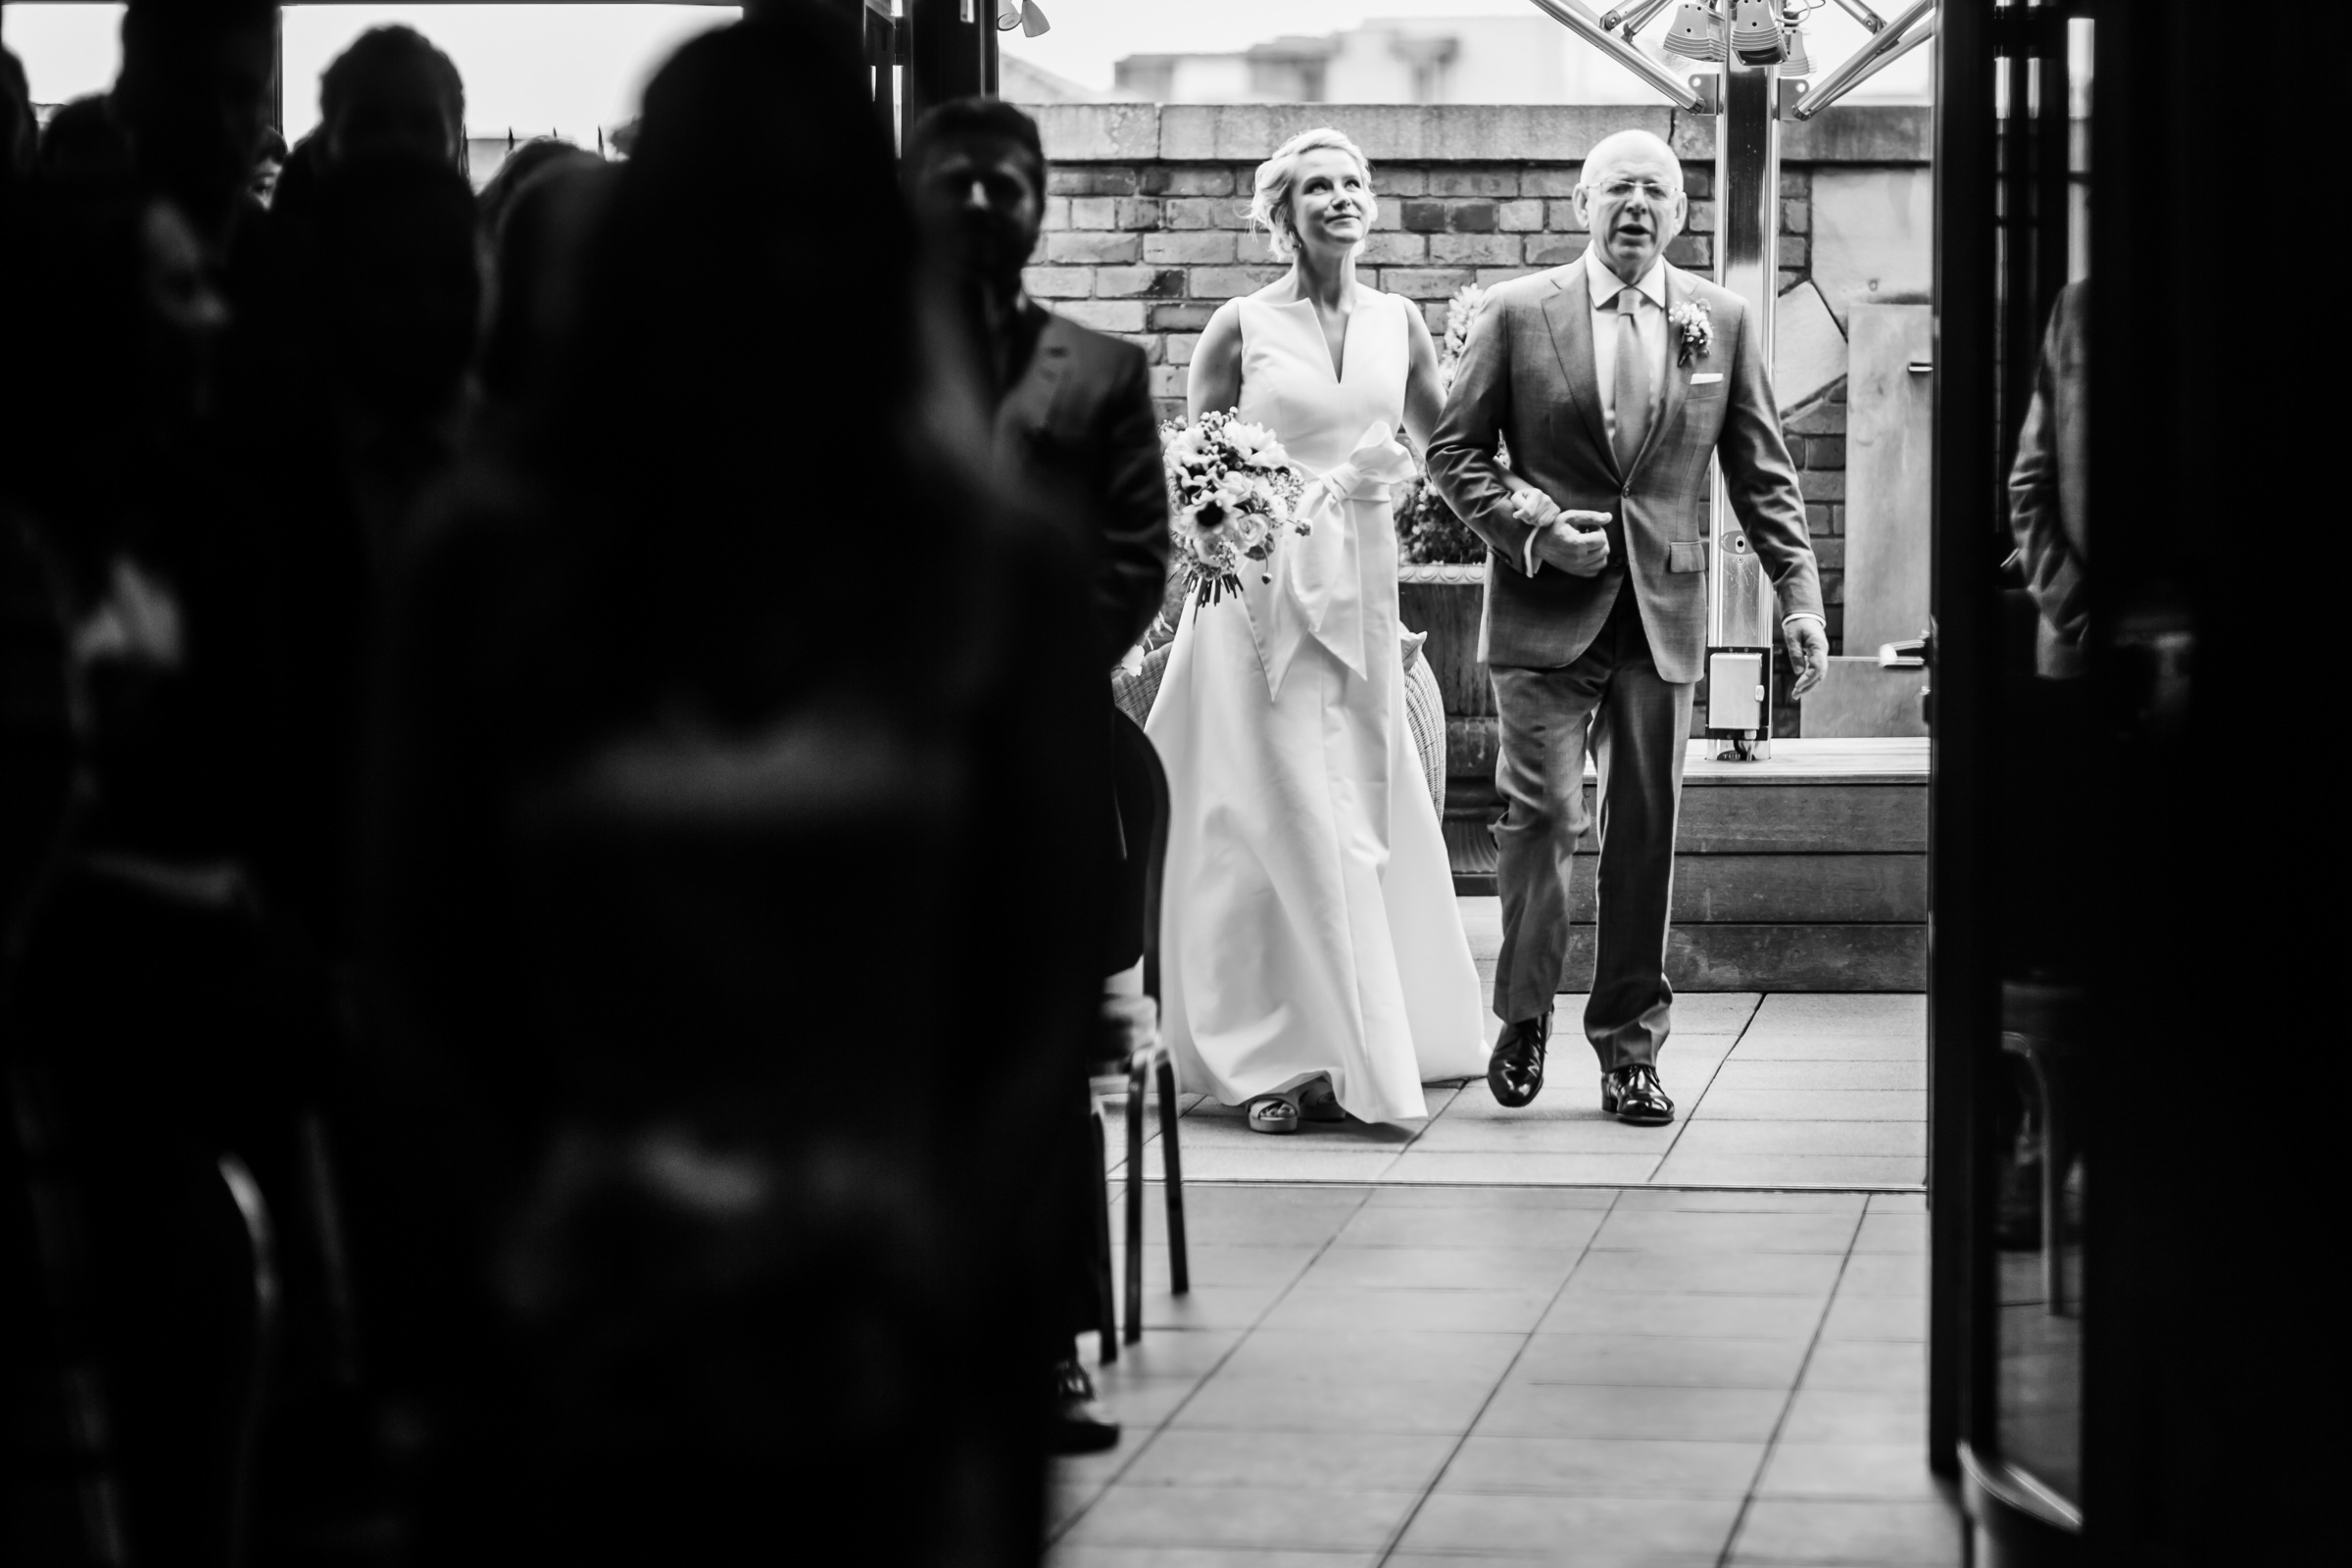 the bride arrives for her wedding at great john street hotel manchester